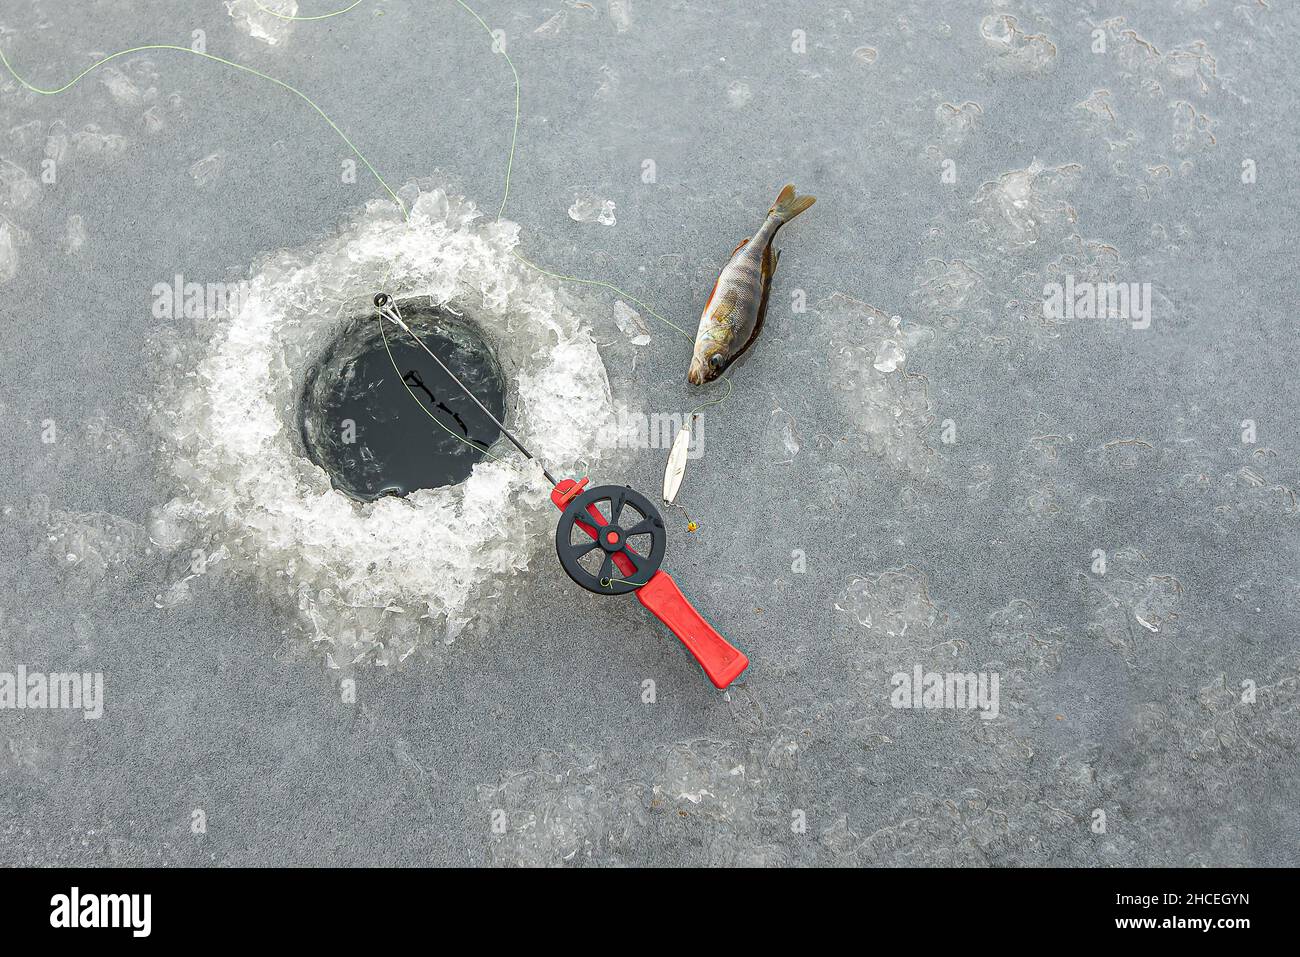 red fishingrod and a silver lure next to a hole in the ice and a perch, Zealand, Denmark, Januar 27, 2021 Stock Photo